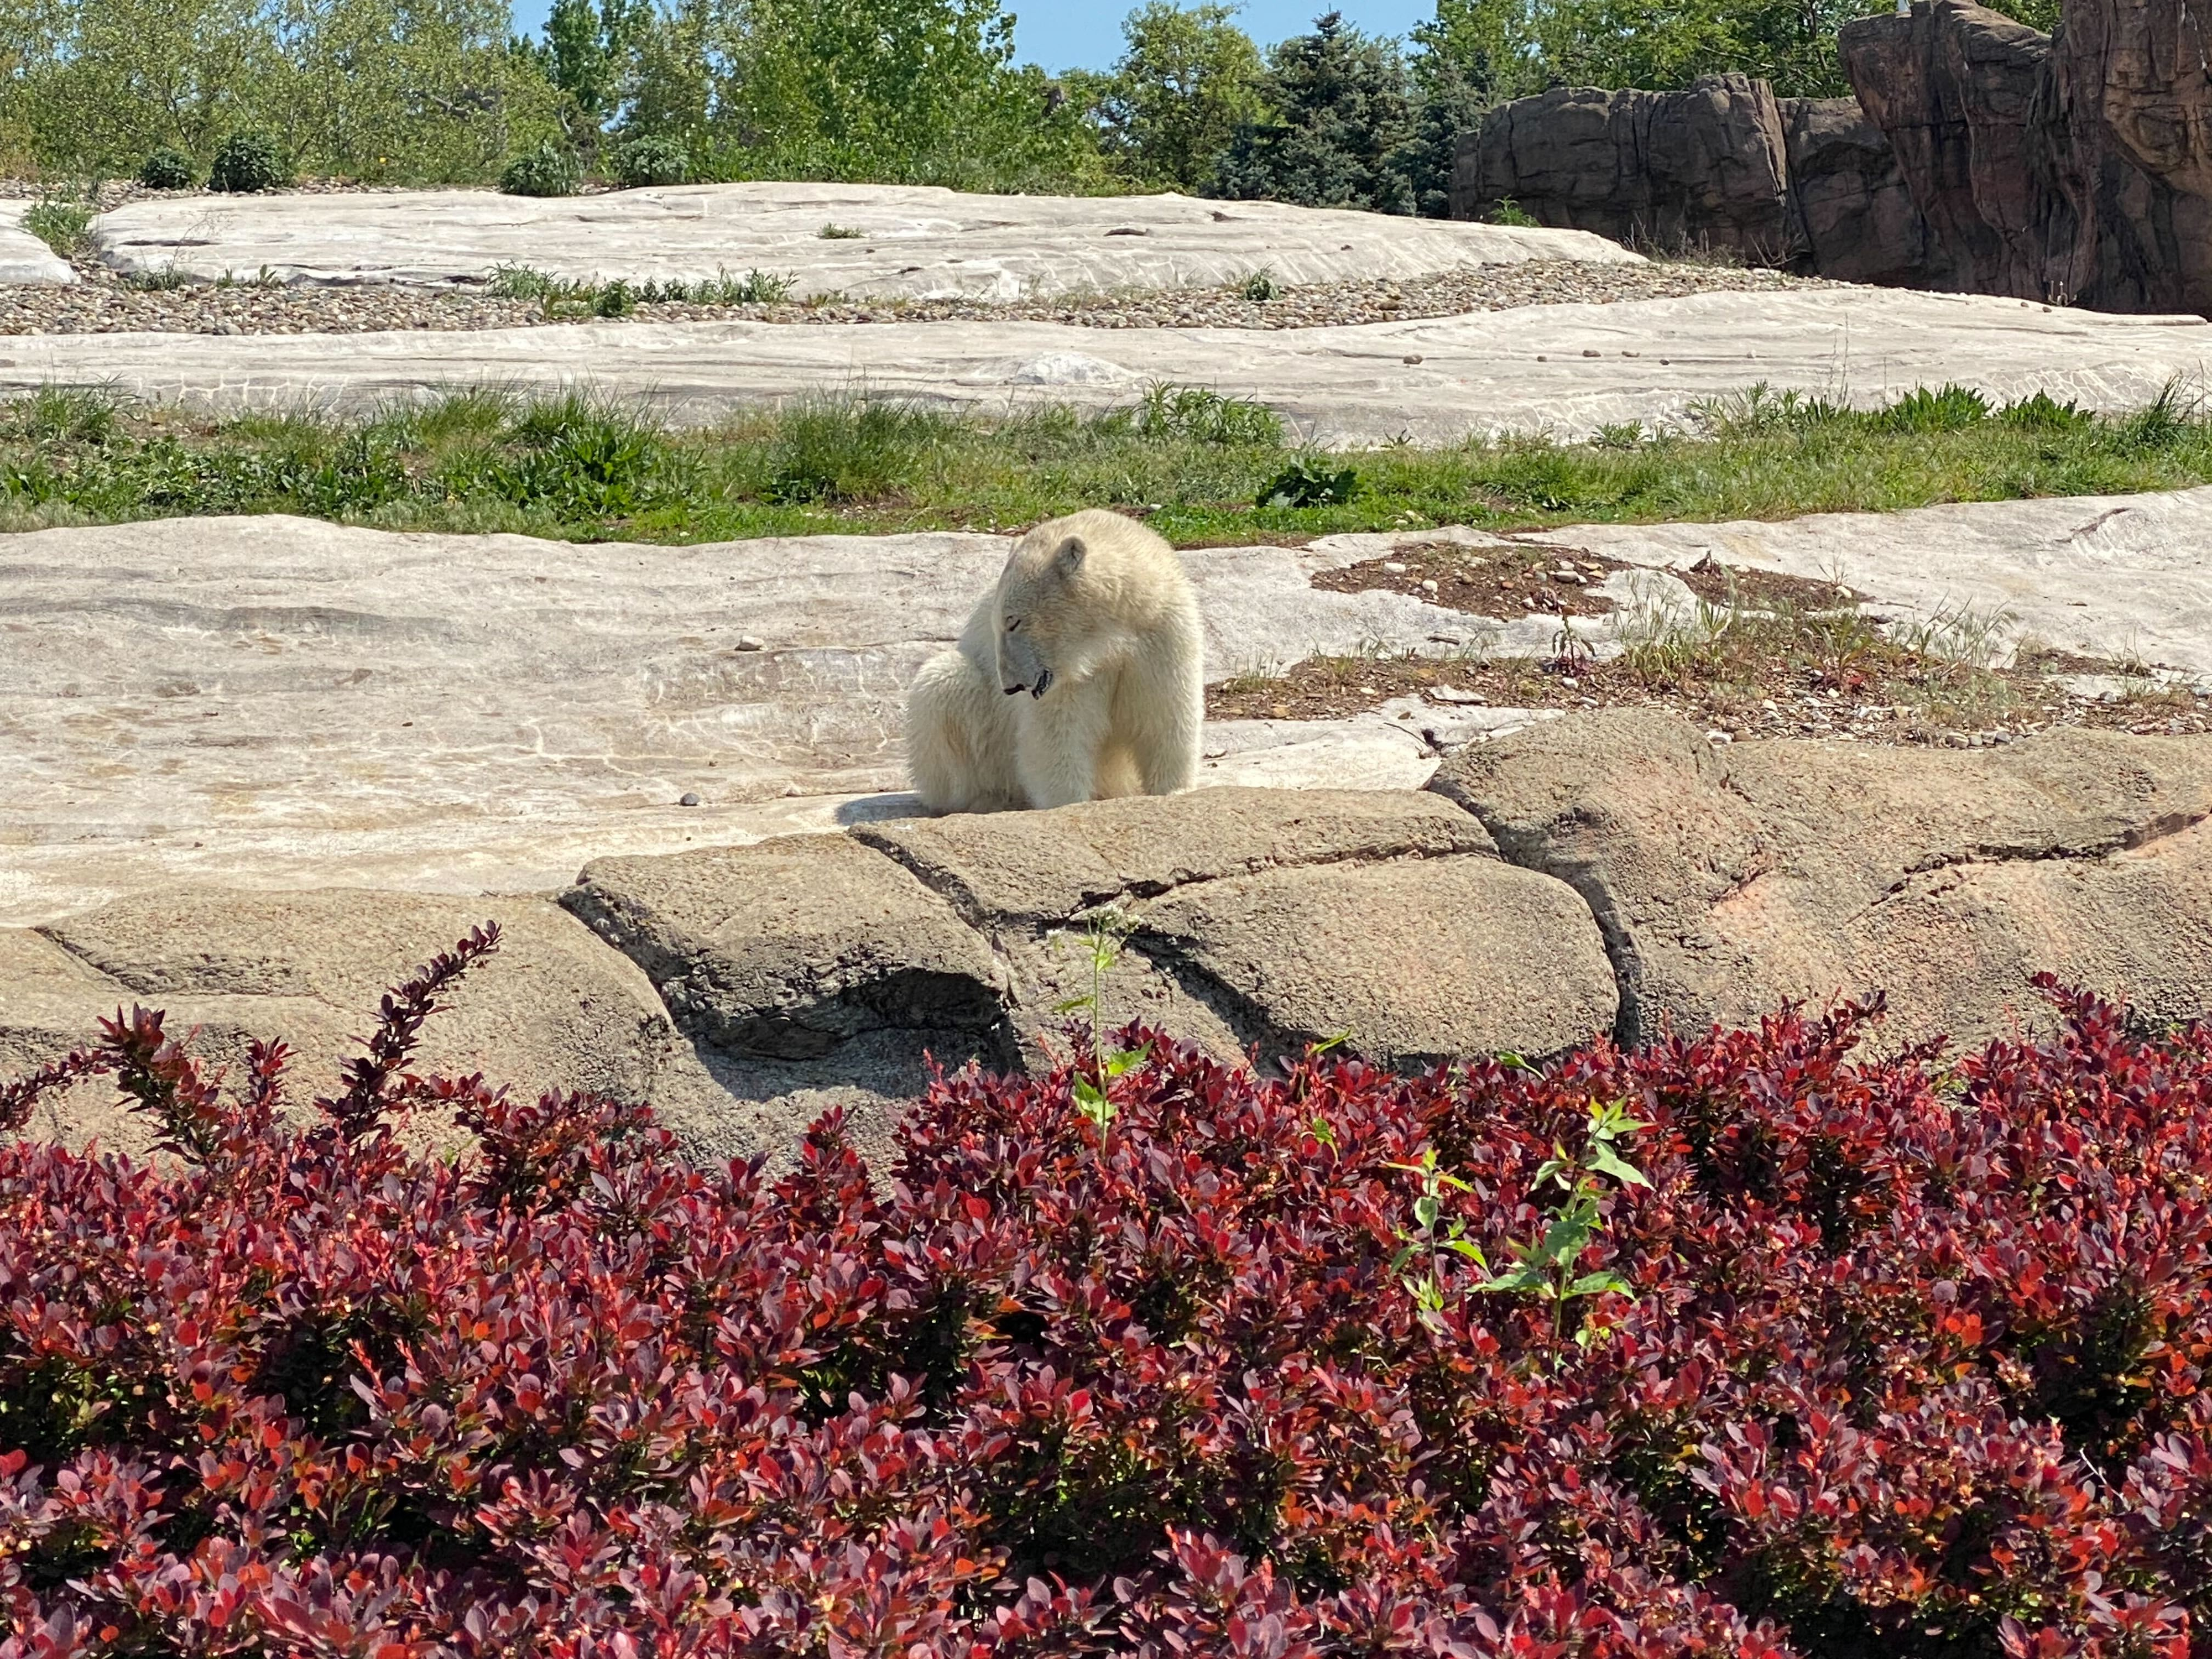 Why are Metro Detroiters saying goodbye to a pair of polar bear cubs from the Detroit Zoo that have captured their hearts?